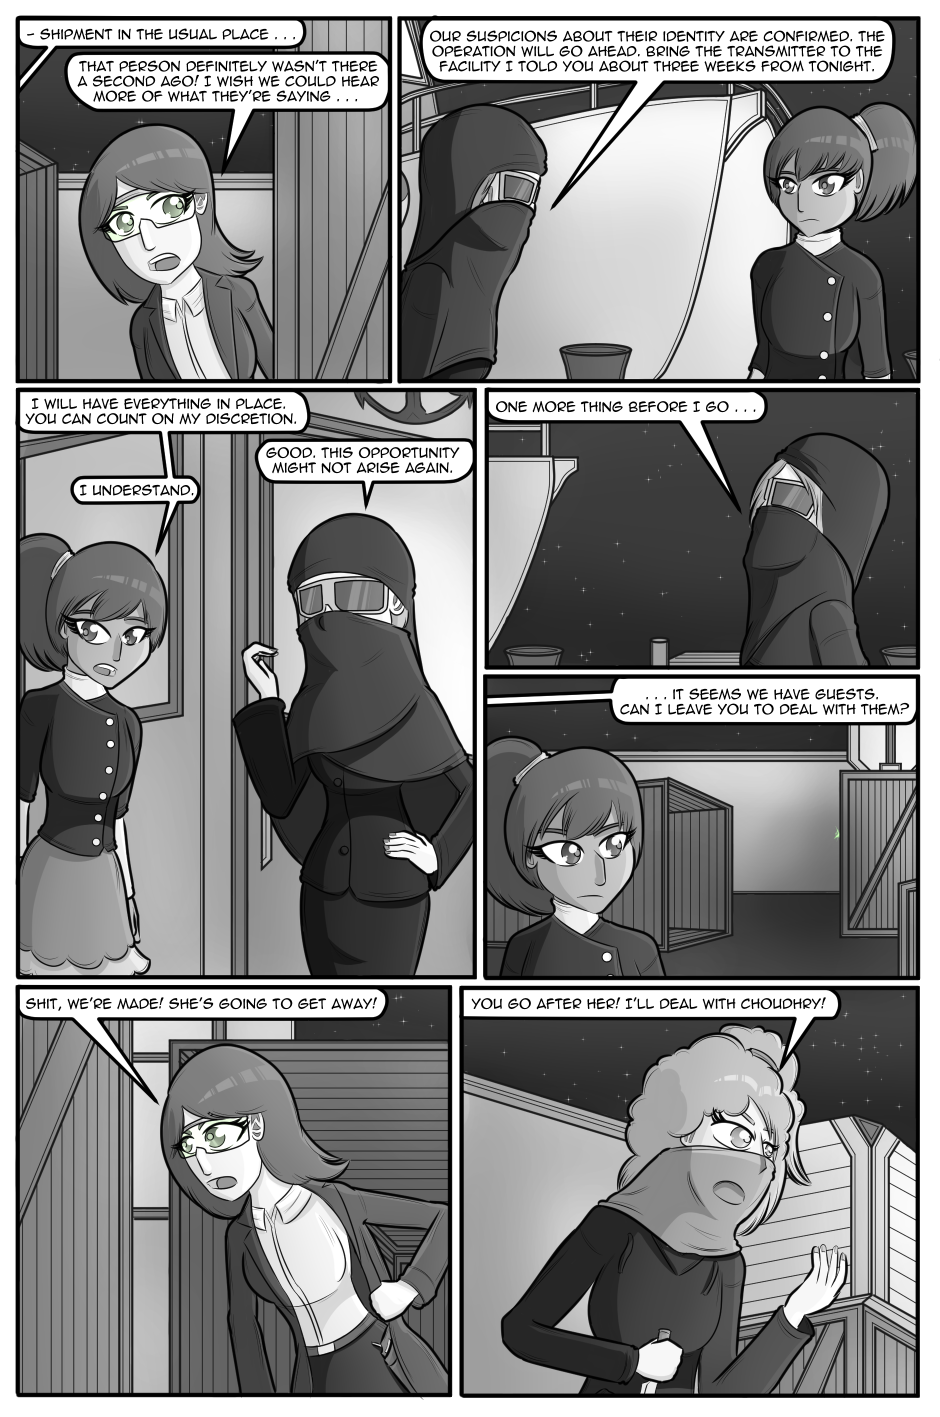 Shadows and Spectres - Part 27